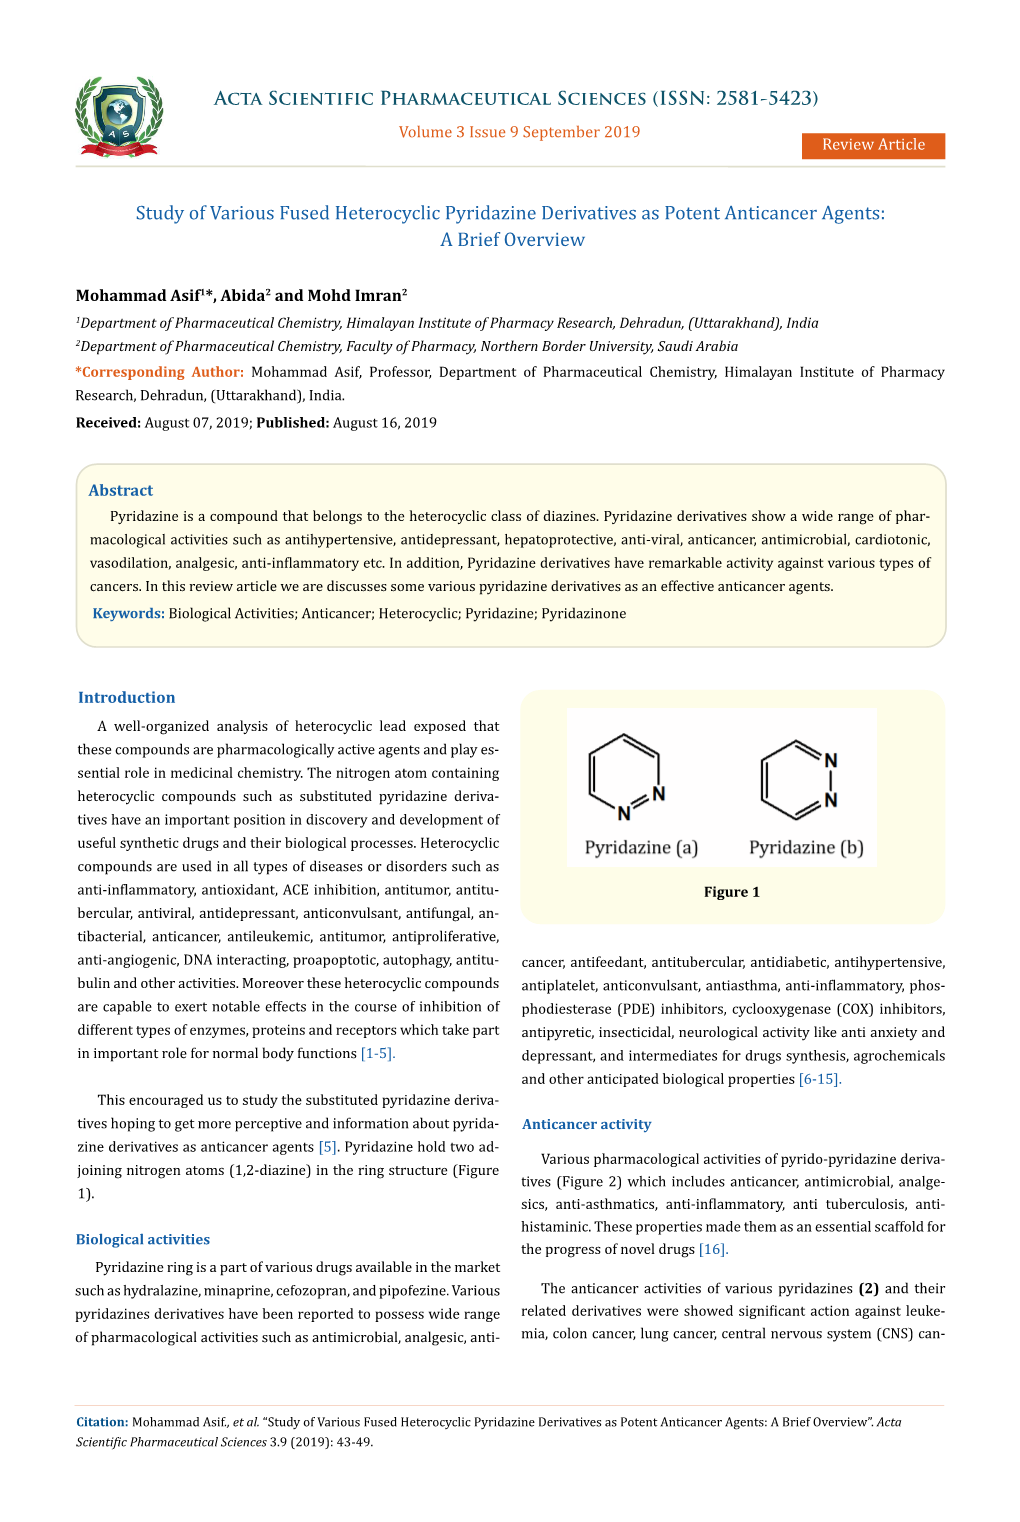 Study of Various Fused Heterocyclic Pyridazine Derivatives As Potent Anticancer Agents: a Brief Overview